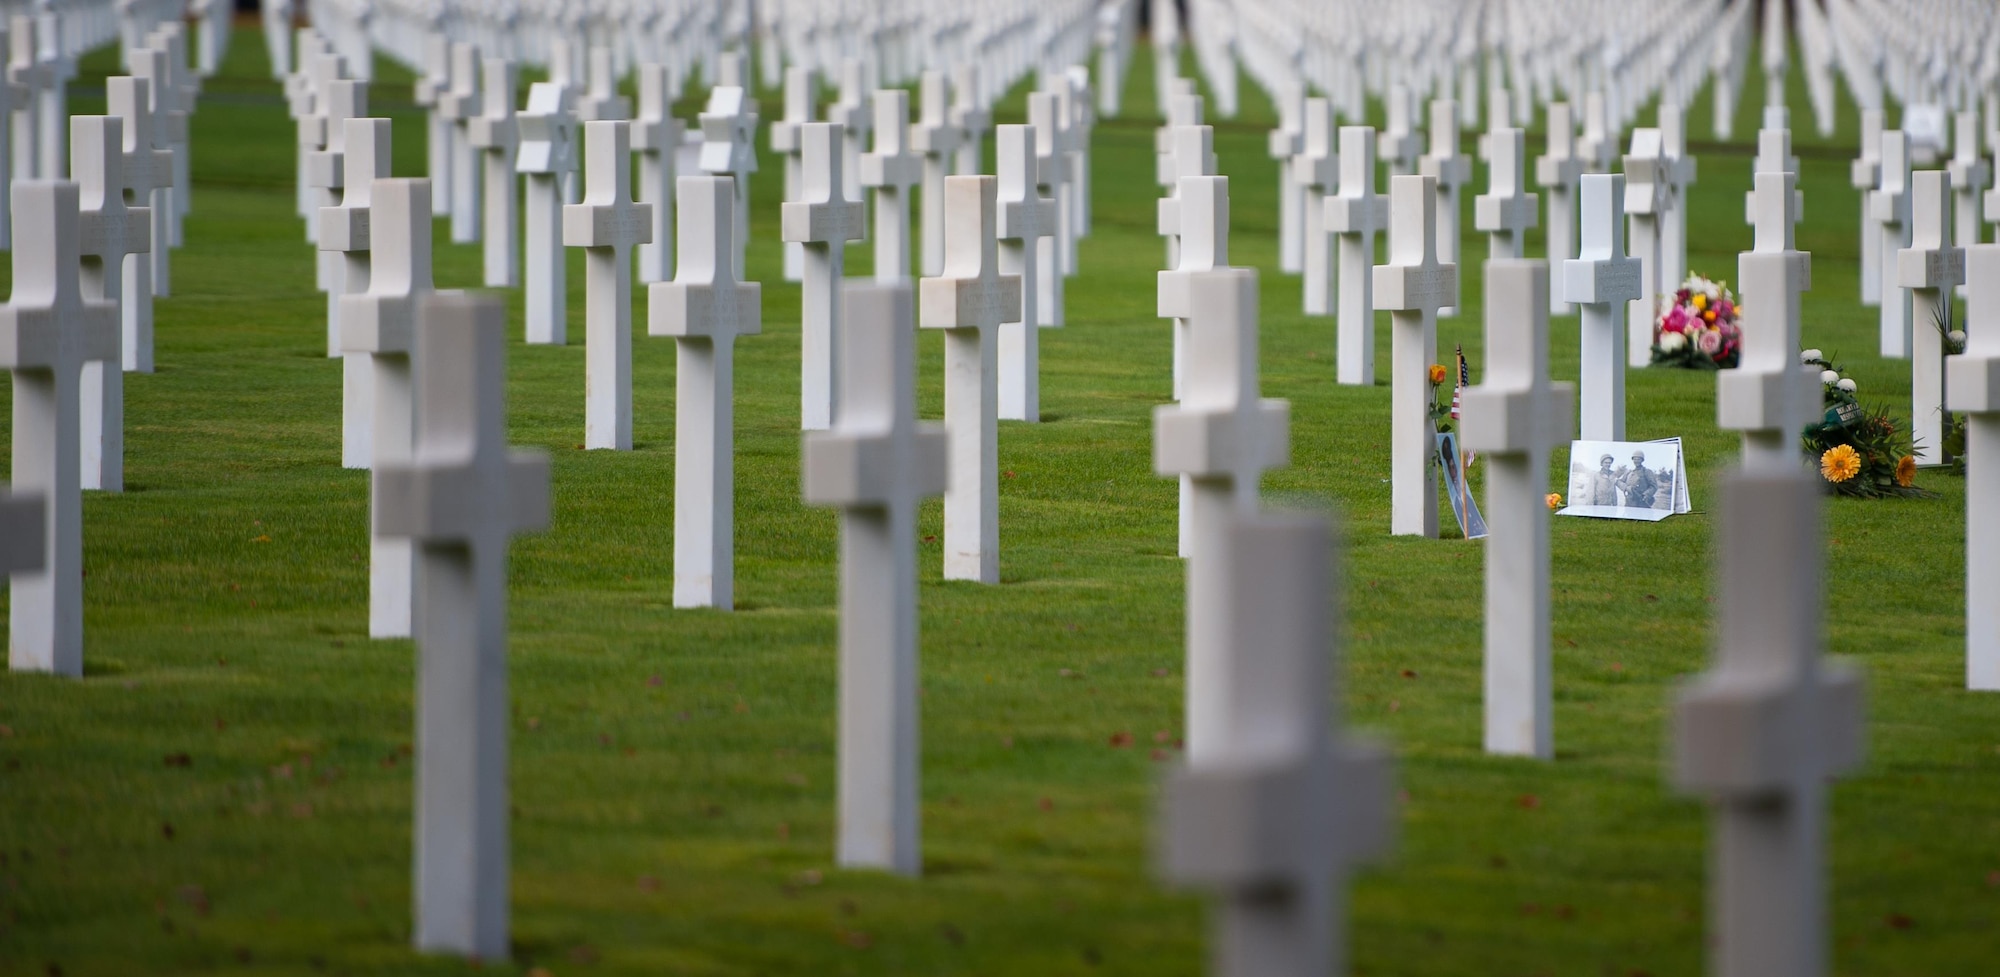 A picture of a deceased war veteran lays on his gravestone at the Lorraine American Cemetery Nov. 11, 2016, at St. Avold, France. Veteran’s Day is observed annually on November 11 and commemorates military veterans who currently serve or have served the U.S. armed forces, including those who gave the ultimate sacrifice. According to the DoD and Veterans Administration, since World War I, approximately 624,000 U.S. servicemembers have been killed in action battling in wars and conflicts. The Lorraine American Cemetery contains the buried remains of over 10,000 of them. It is the largest burial site of U.S. servicemembers in Europe. (U.S. Air Force photo by Airman 1st Class Lane T. Plummer)